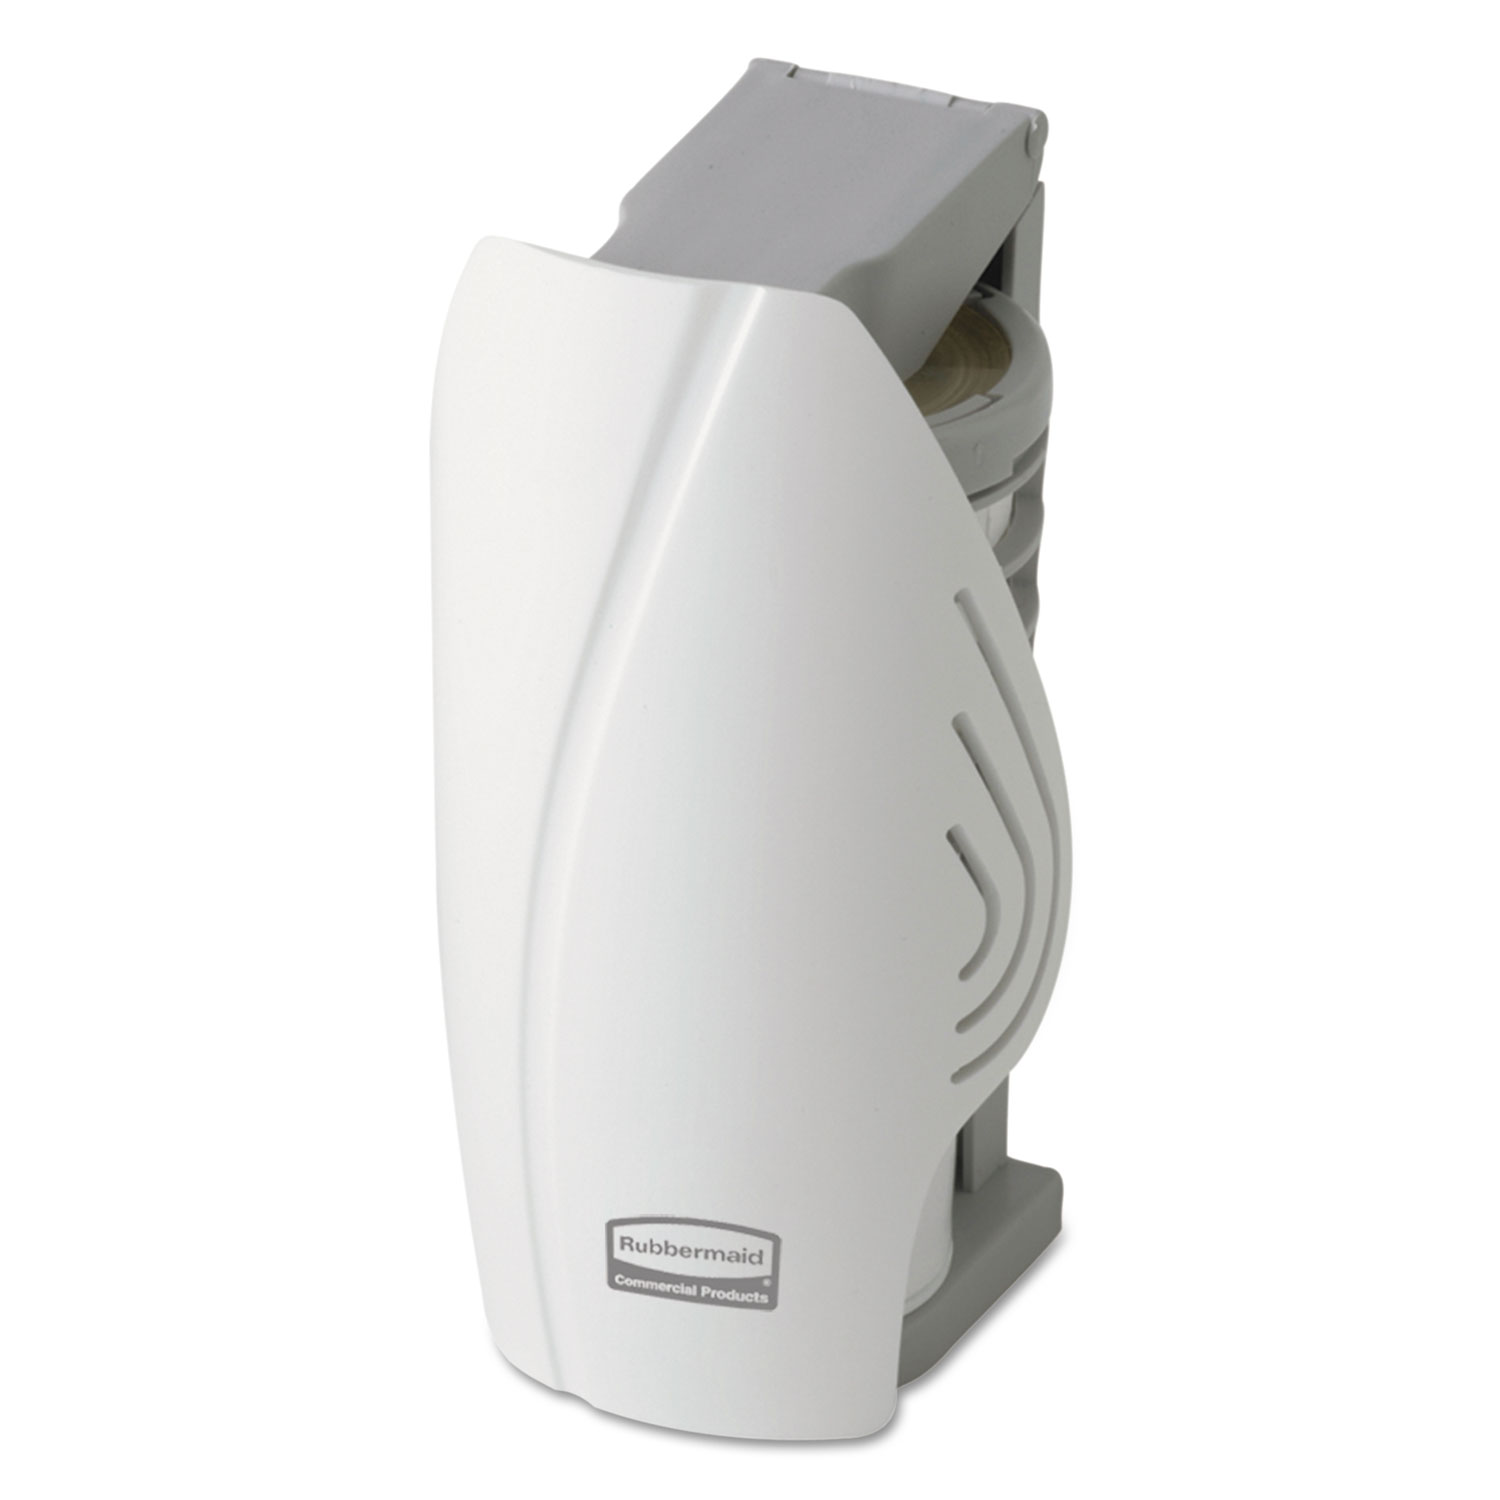  Rubbermaid Commercial 1793547 TC TCell Odor Control Dispenser, 2.75 x 2.5 x 5.25, White (RCP1793547) 